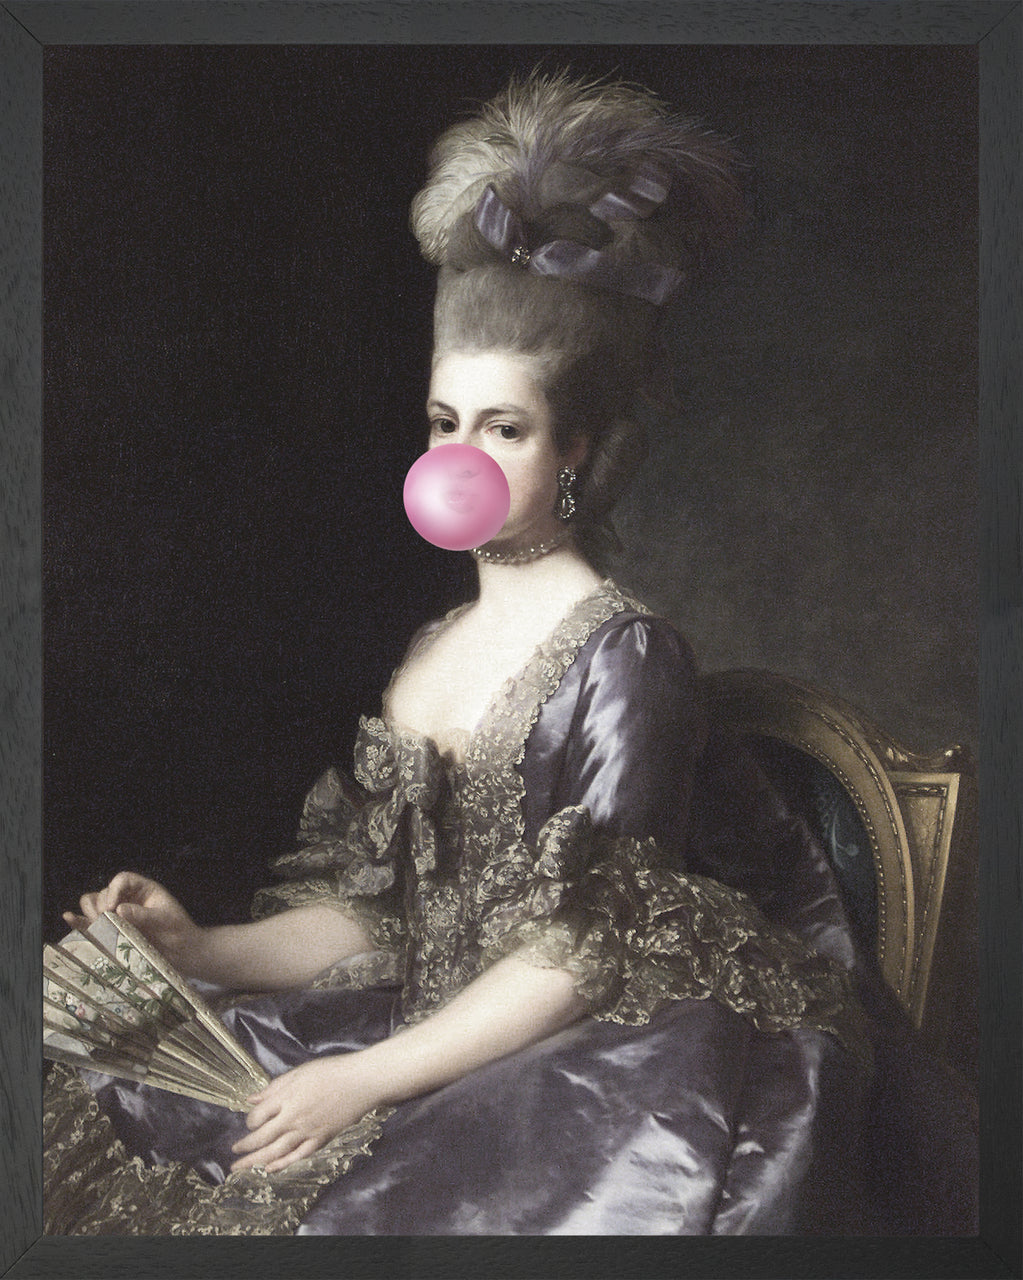 Bubblegum Portrait of a Lady with Upswept Hair and Fan